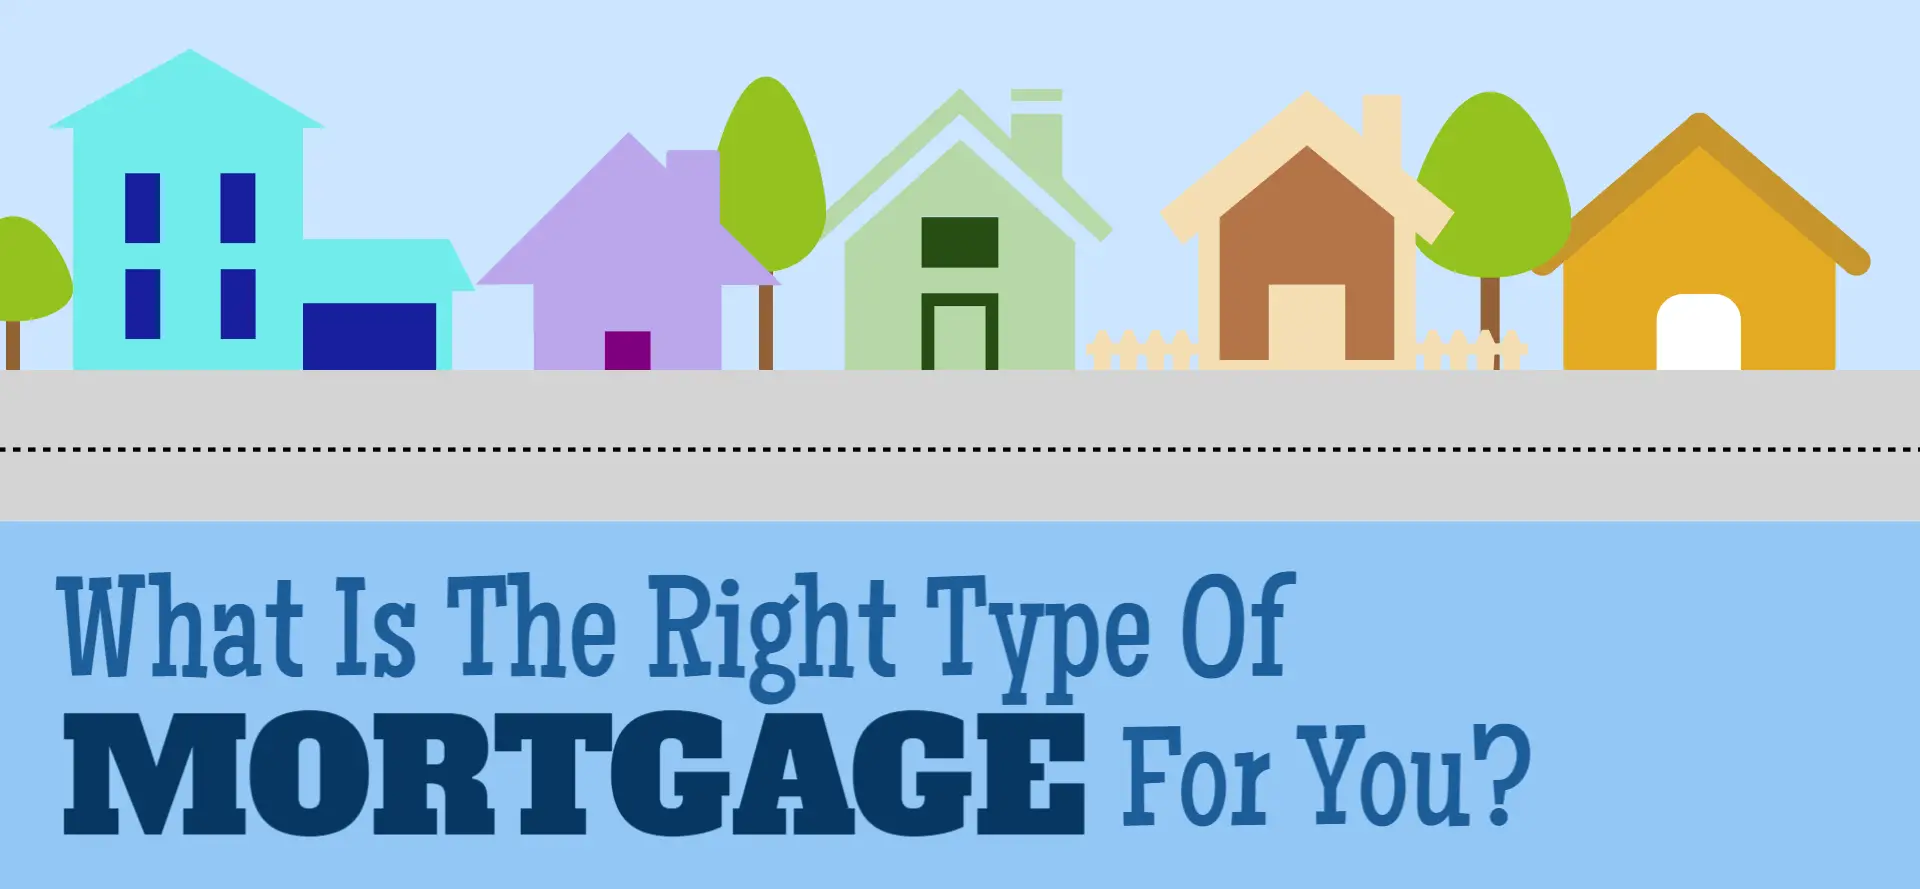 What Is The Right Type of Mortgage For You?